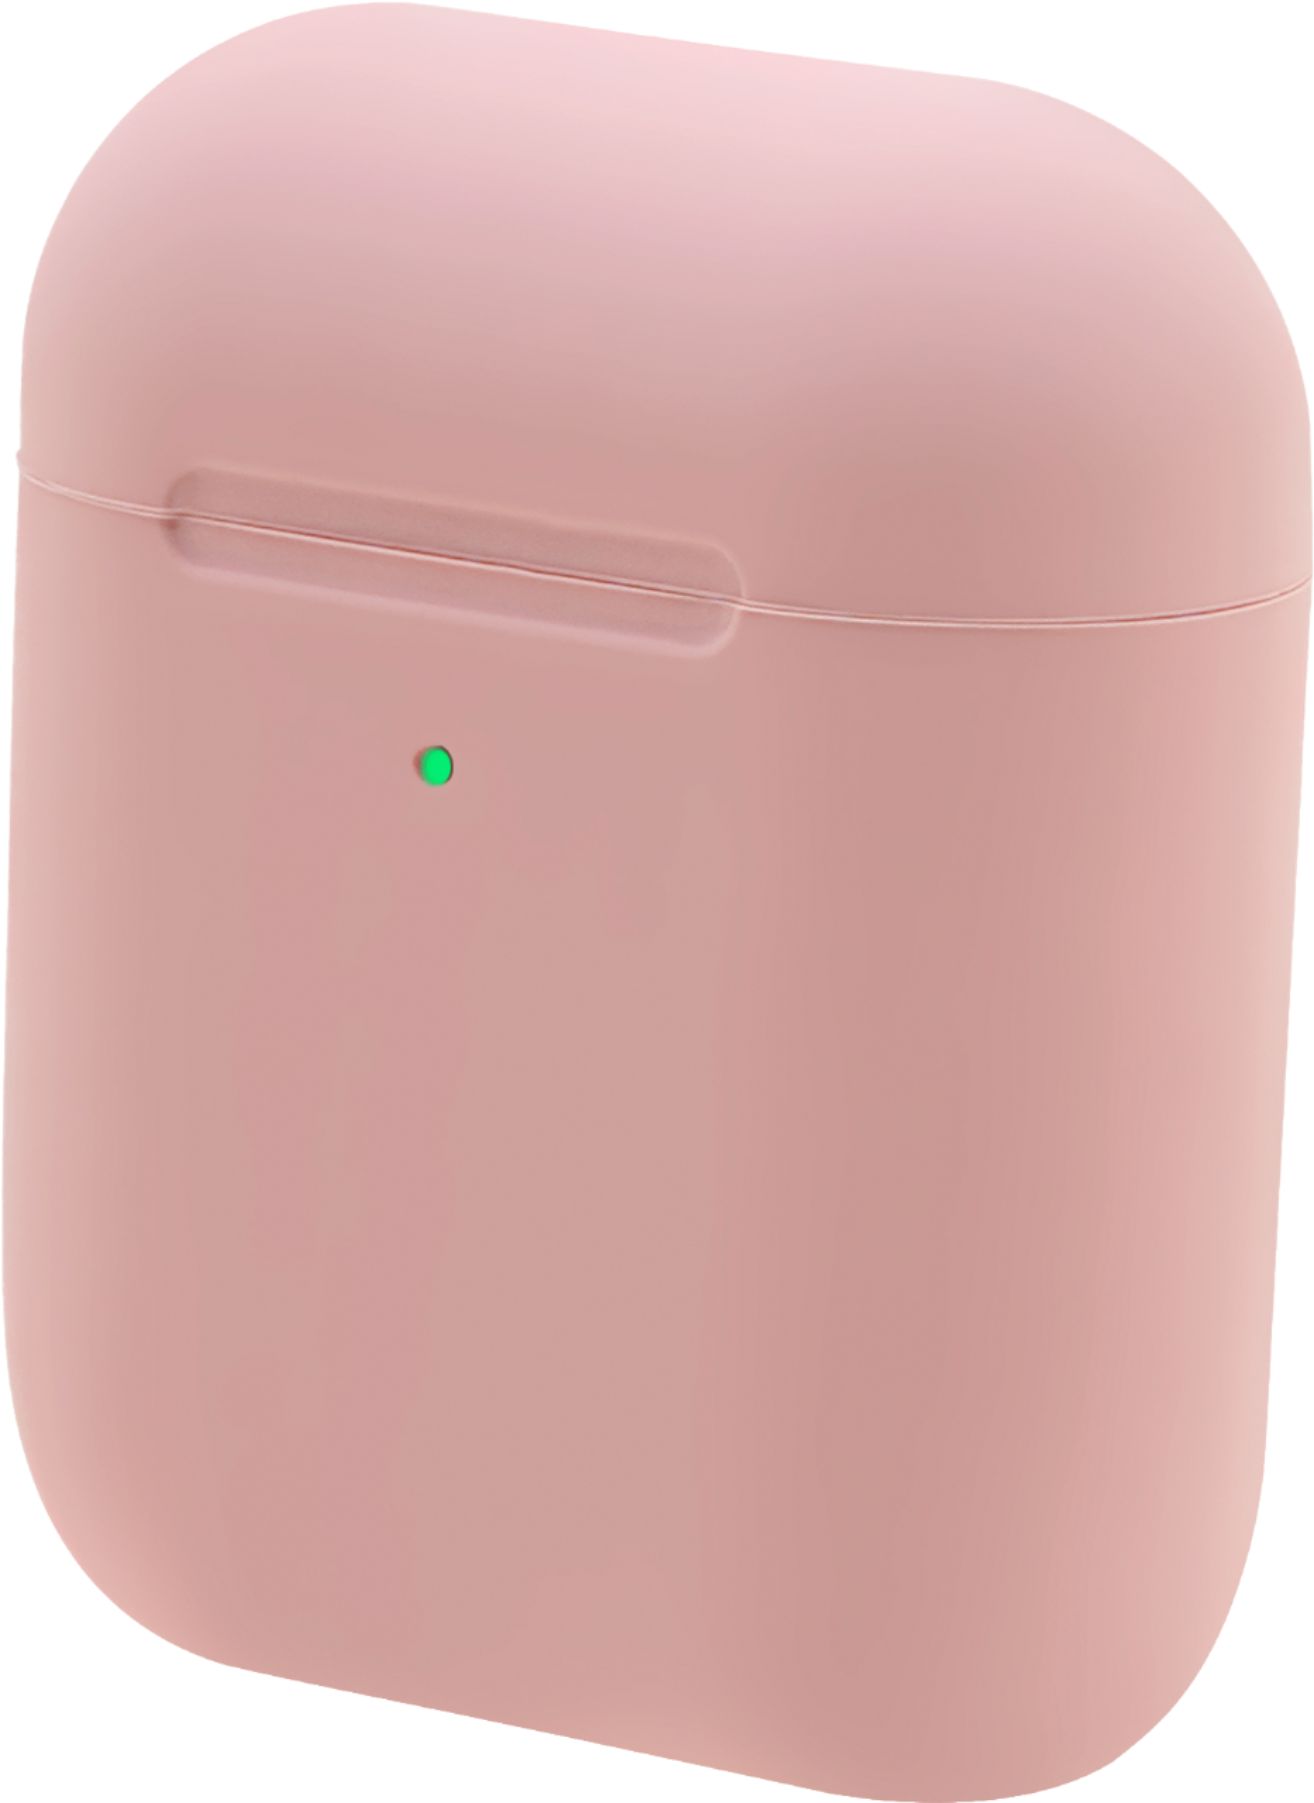 Angle View: NEXT - Sport Case for Apple AirPods - Pink